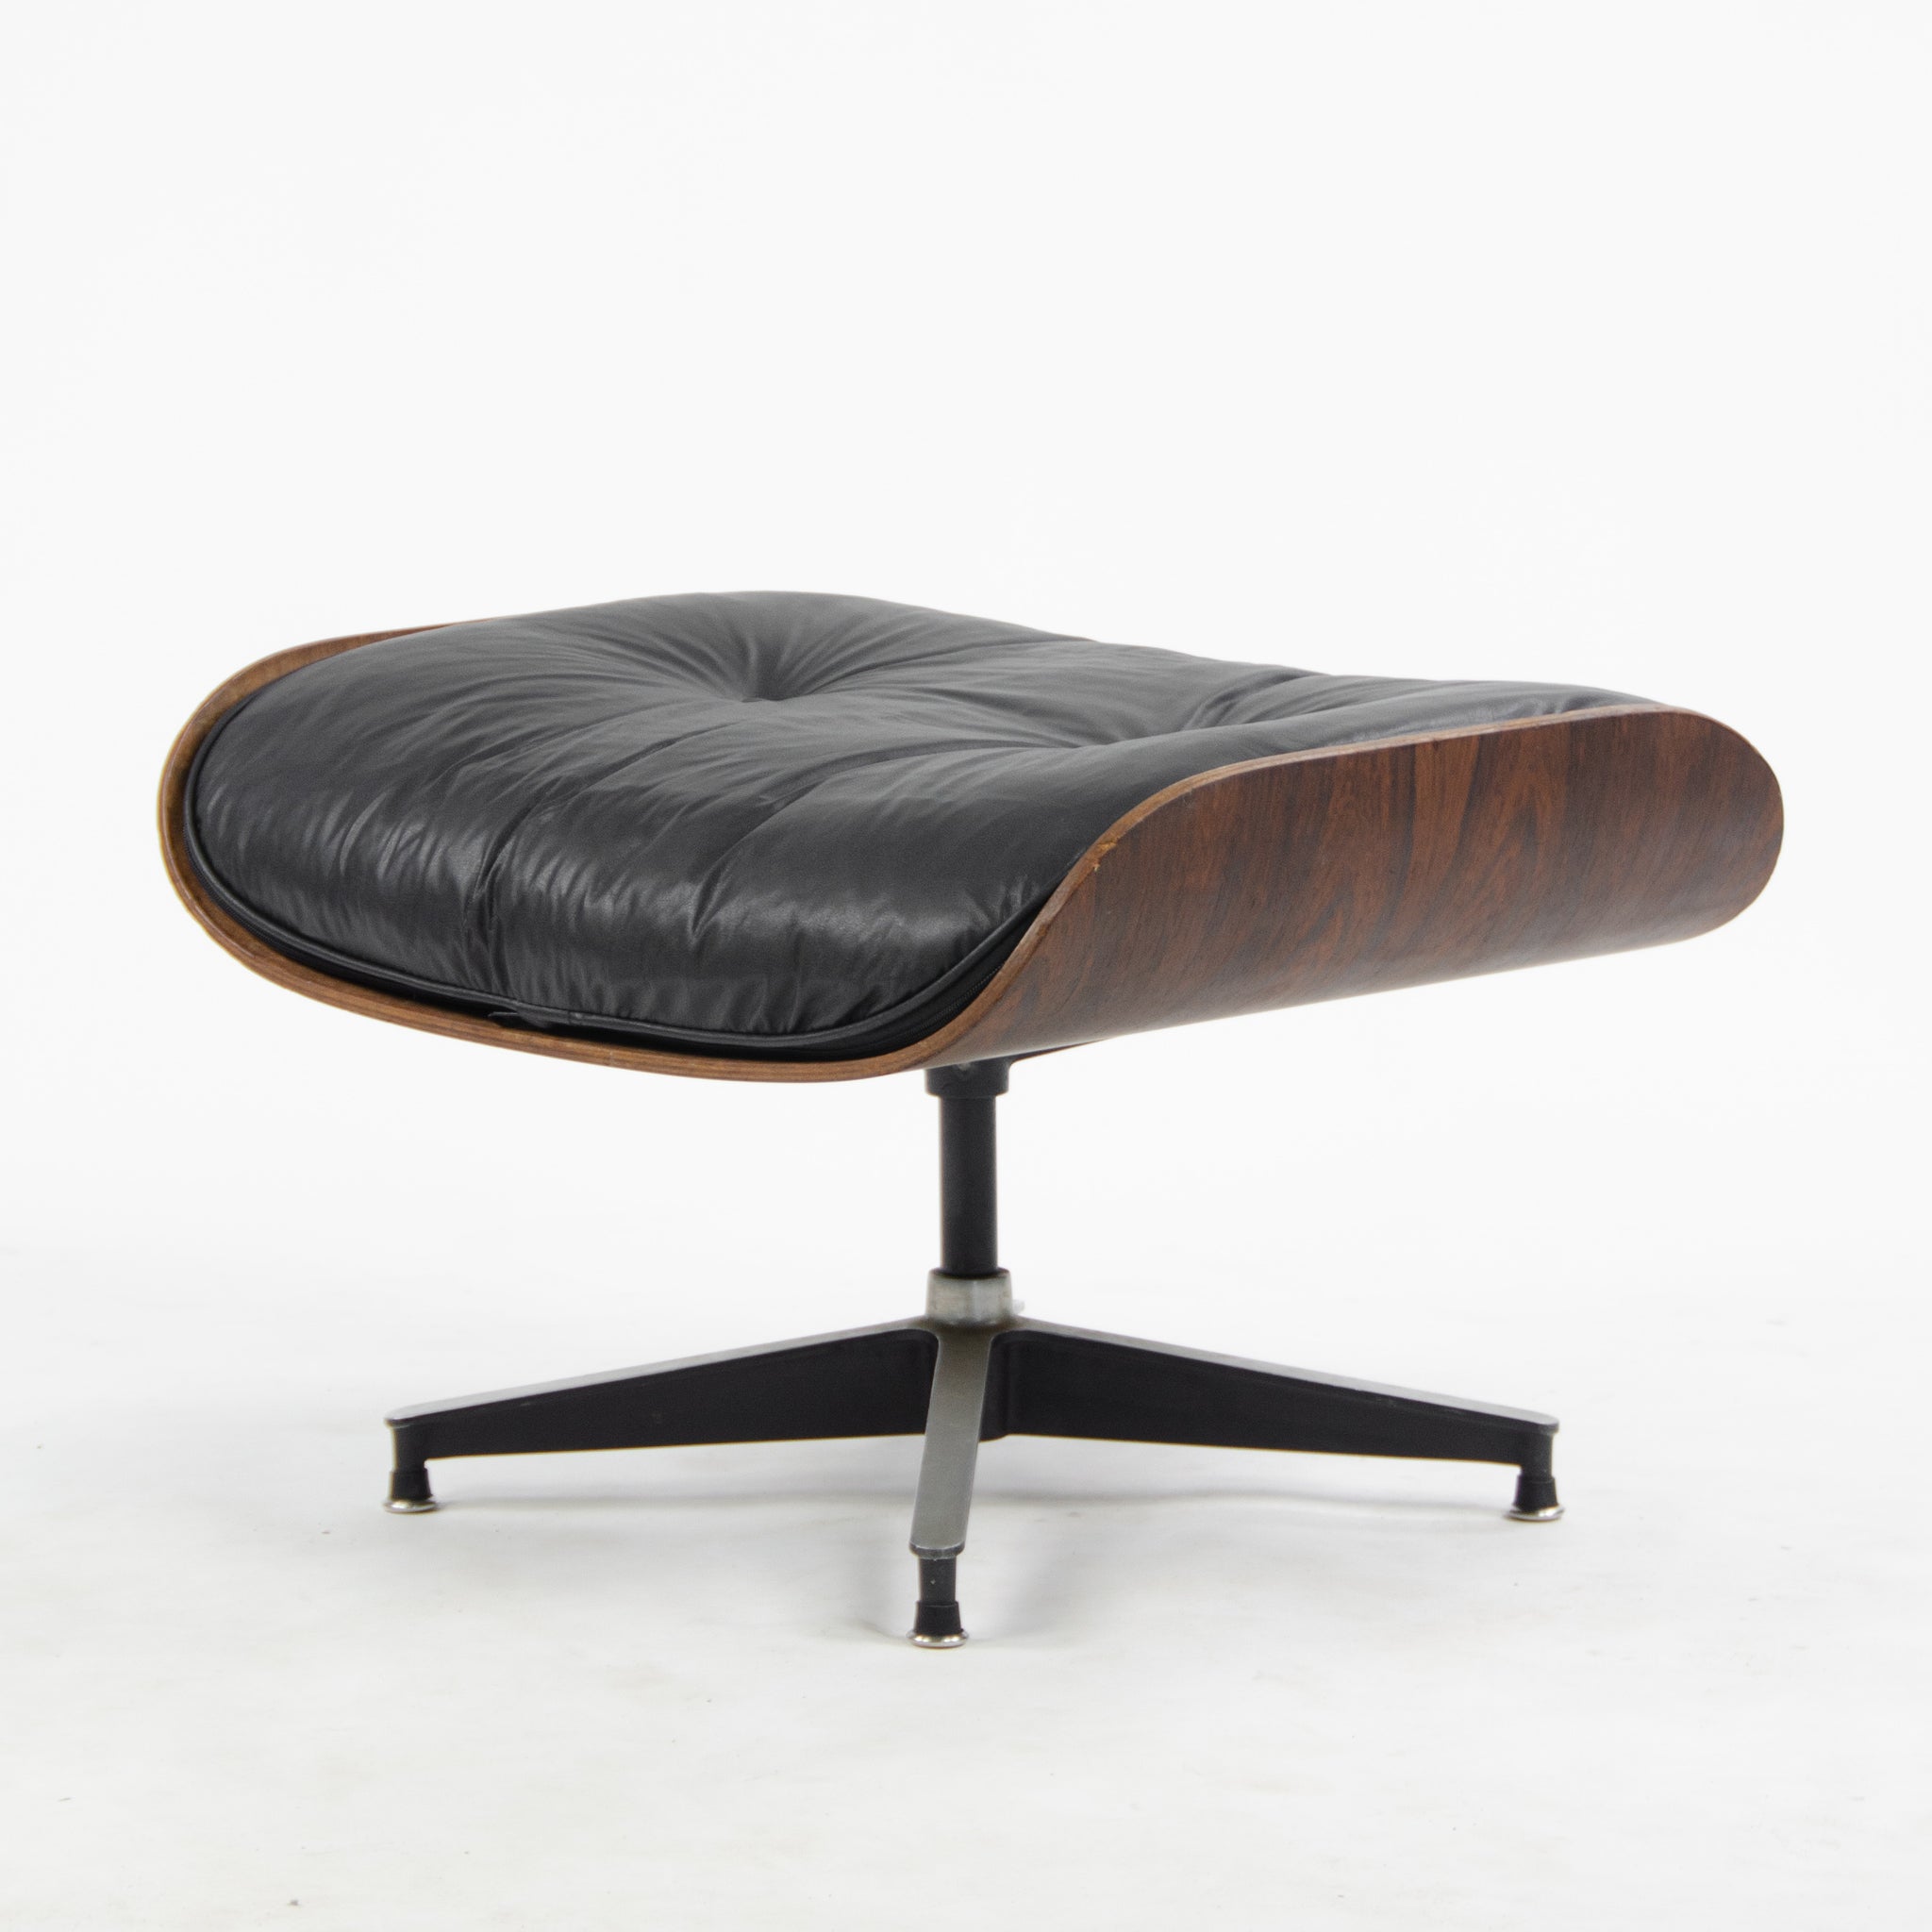 SOLD 1956 Herman Miller Eames Lounge Chair & Ottoman 670 671 New Cushions